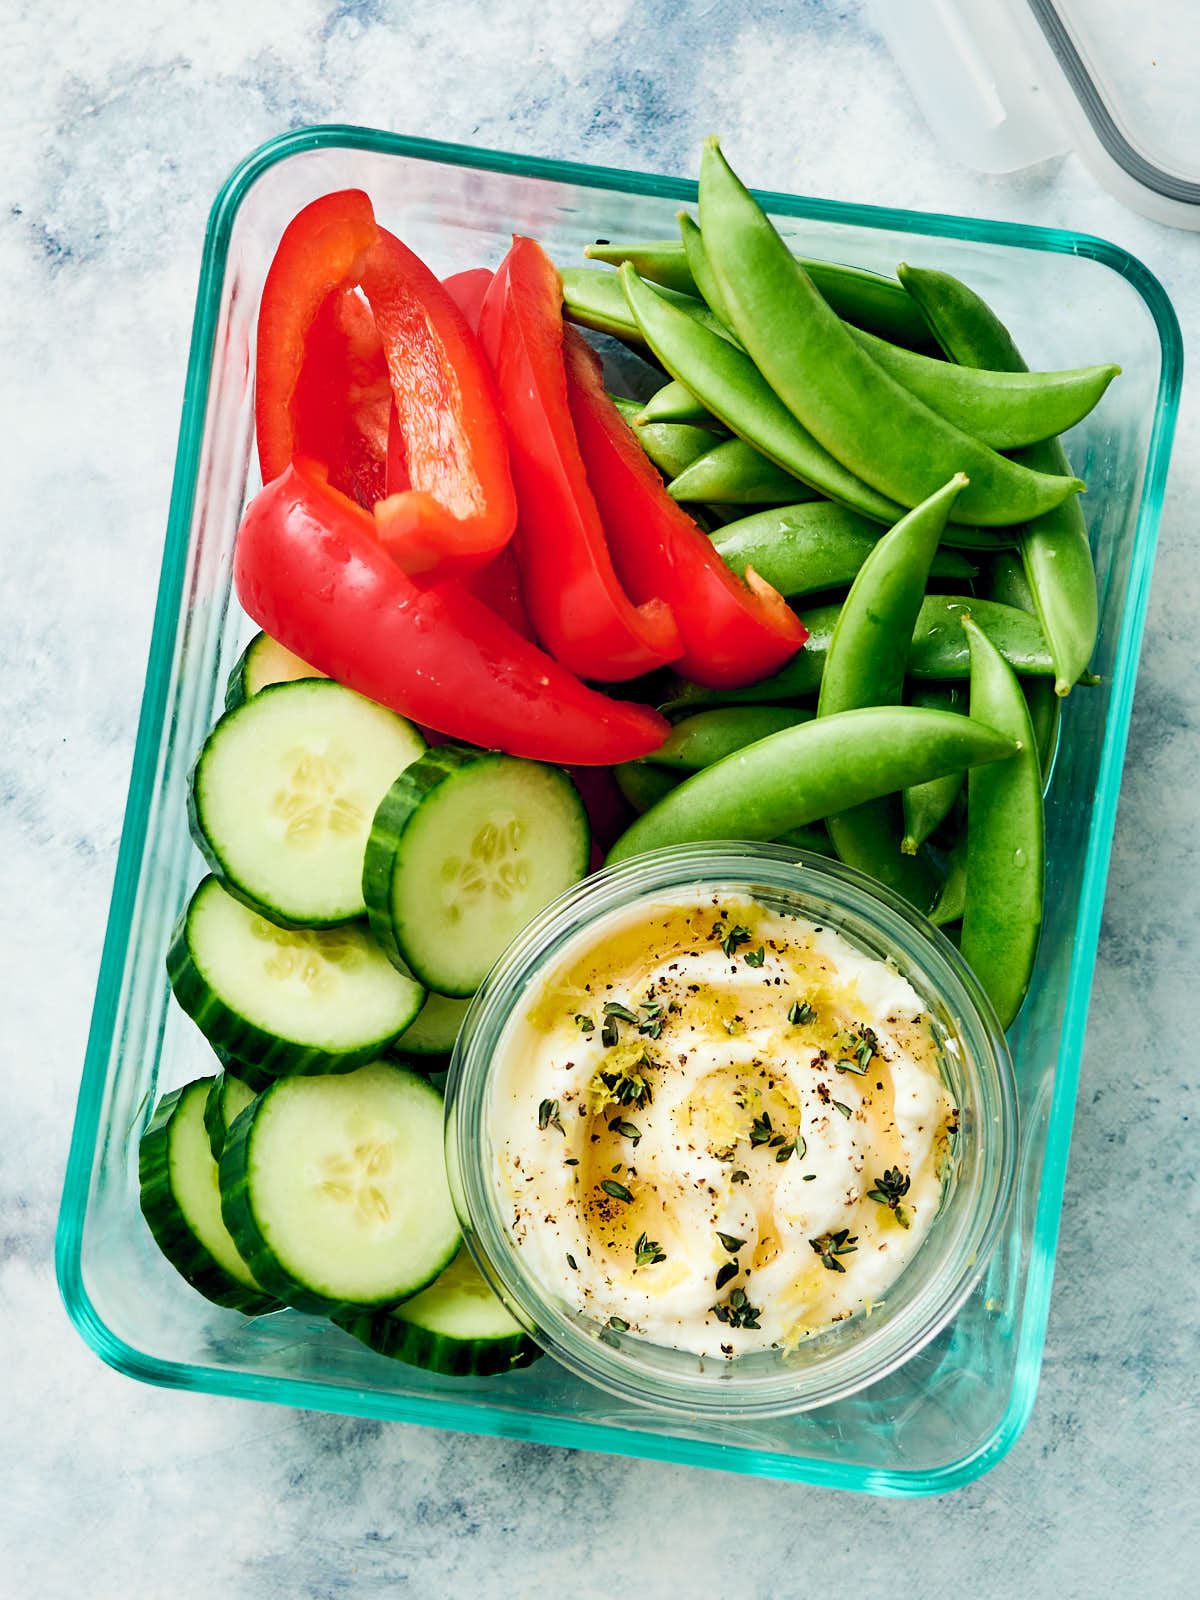 Whipped ricotta dip in a meal prep container with fresh veggies.